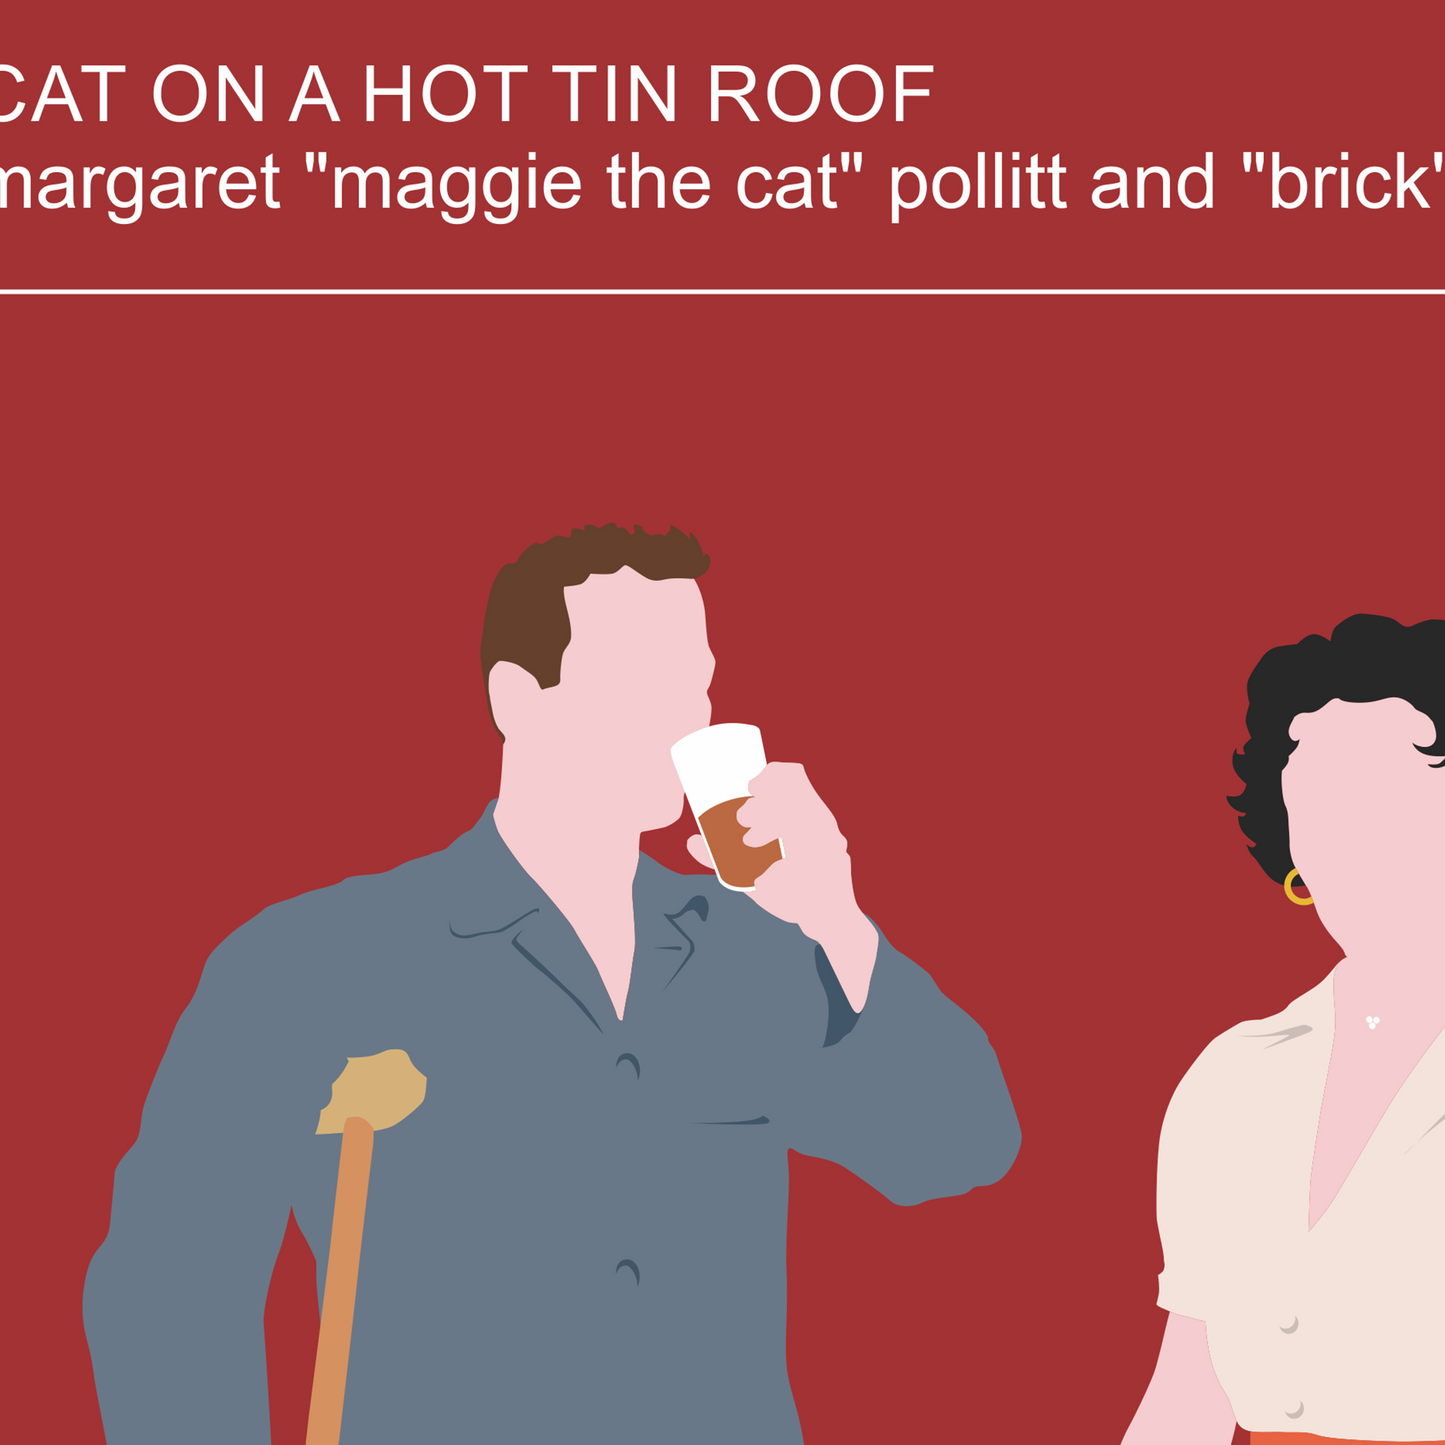 New Poster! Cat on a Hot Tin Roof movie poster, Elizabeth Taylor and Paul Newman